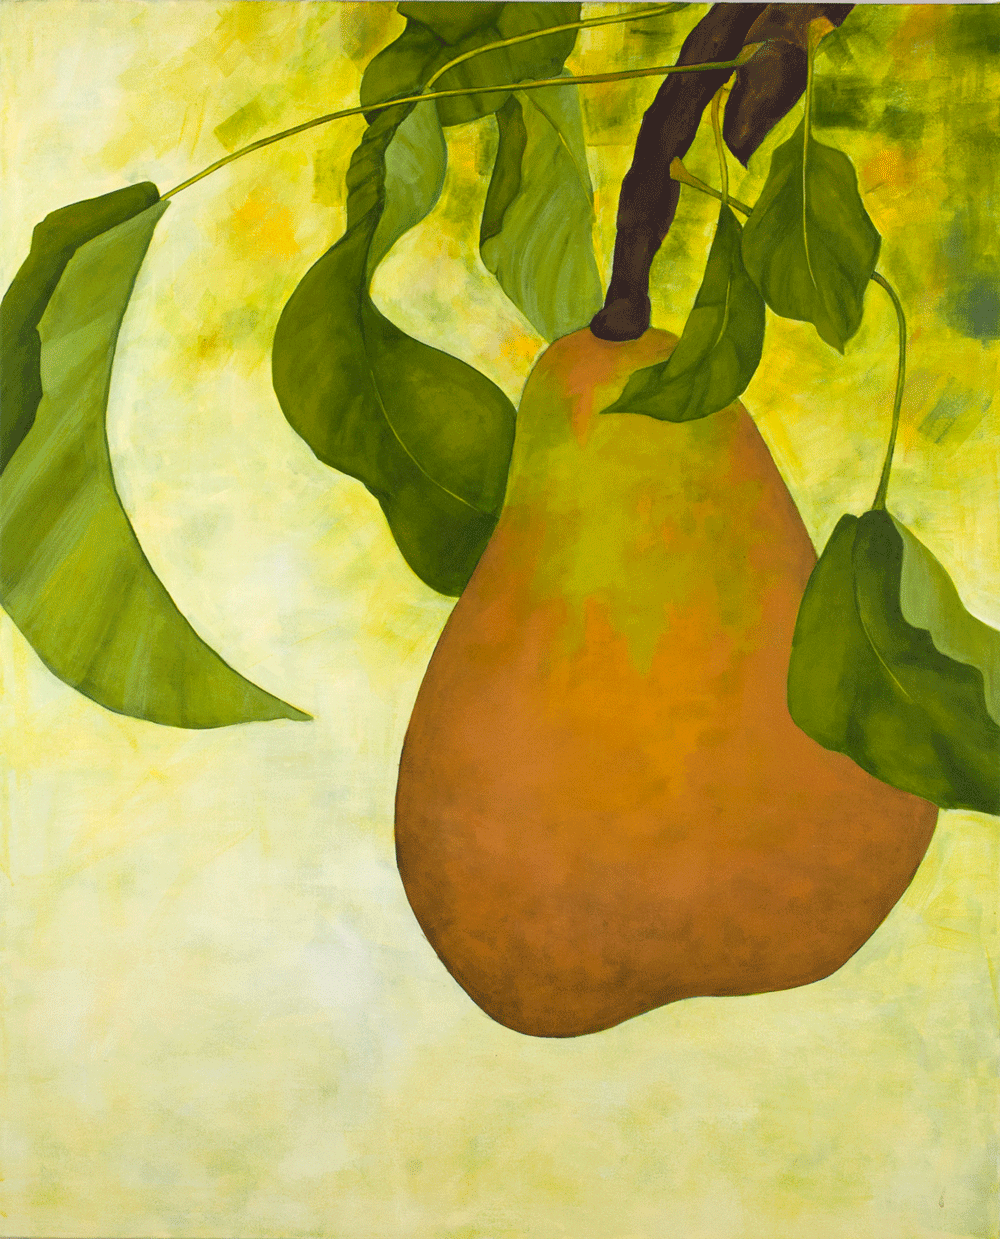  Orchard Pear 3 Acrylic on canvas | 800 x 1000mm 